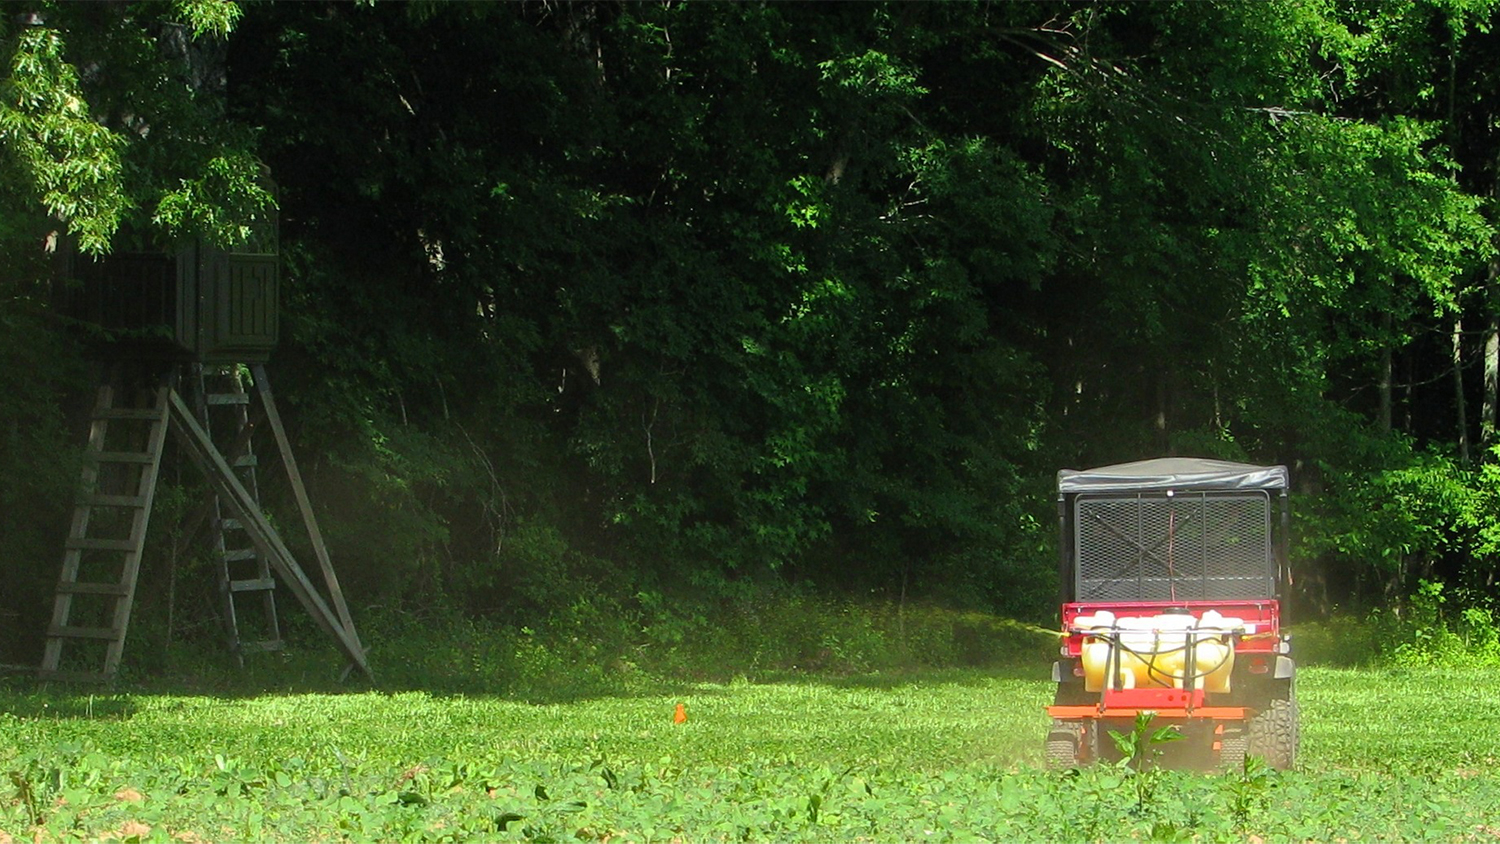 A small UTV spreads fertilizer and weed spray in a food plot field.